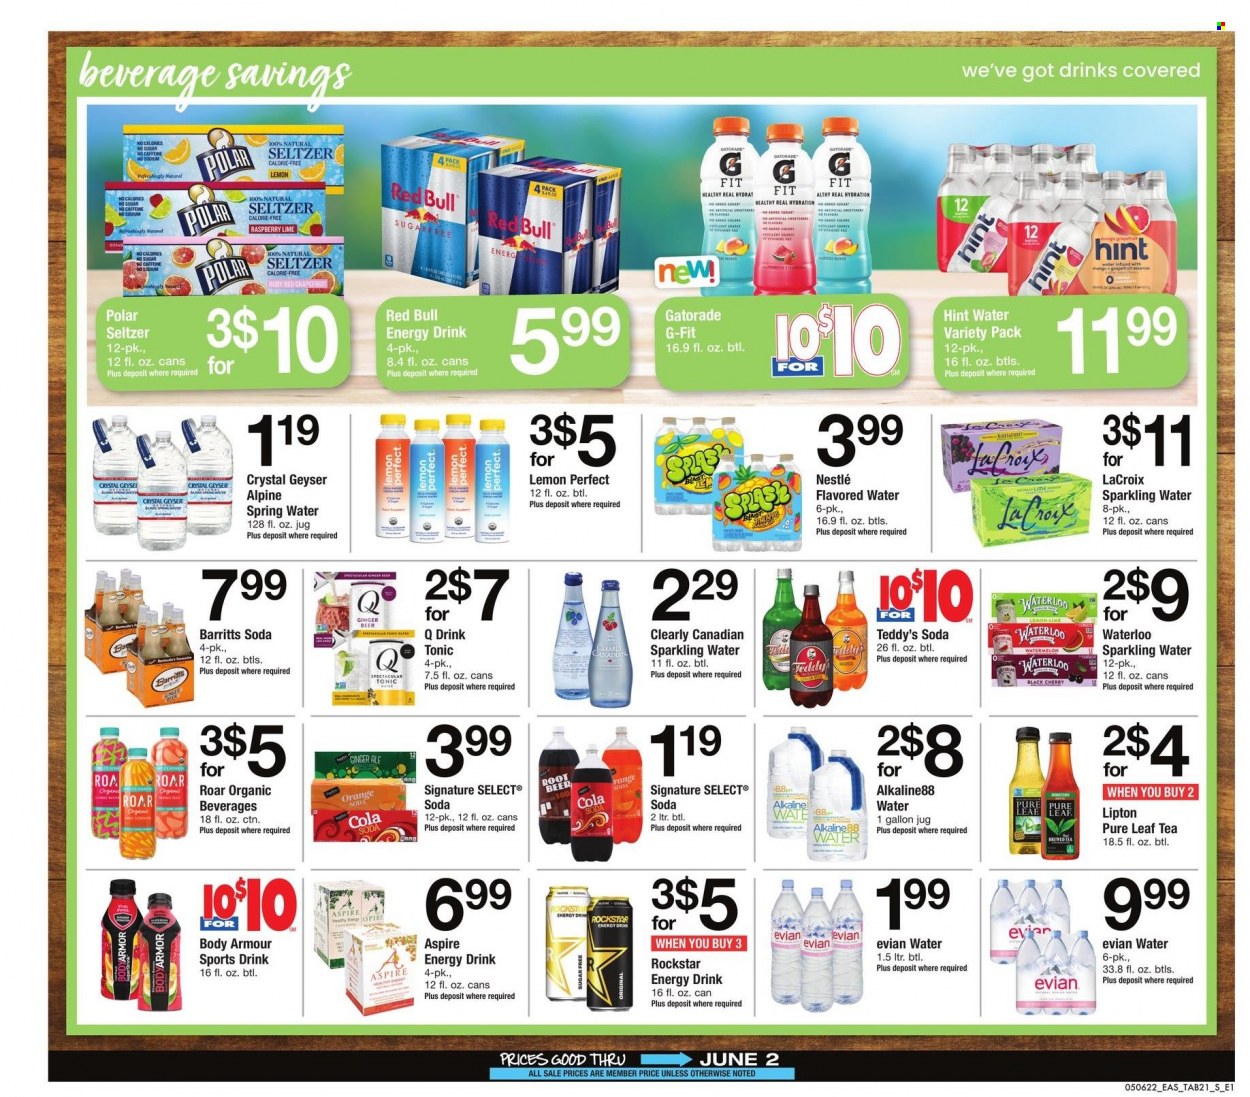 thumbnail - Safeway Flyer - 05/06/2022 - 06/02/2022 - Sales products - watermelon, cherries, oranges, Nestlé, Body Armor, energy drink, Lipton, tonic, Red Bull, Rockstar, Gatorade, seltzer water, spring water, flavored water, soda, sparkling water, Evian, tea, Pure Leaf, beer, gallon, teddy, ginger beer. Page 21.